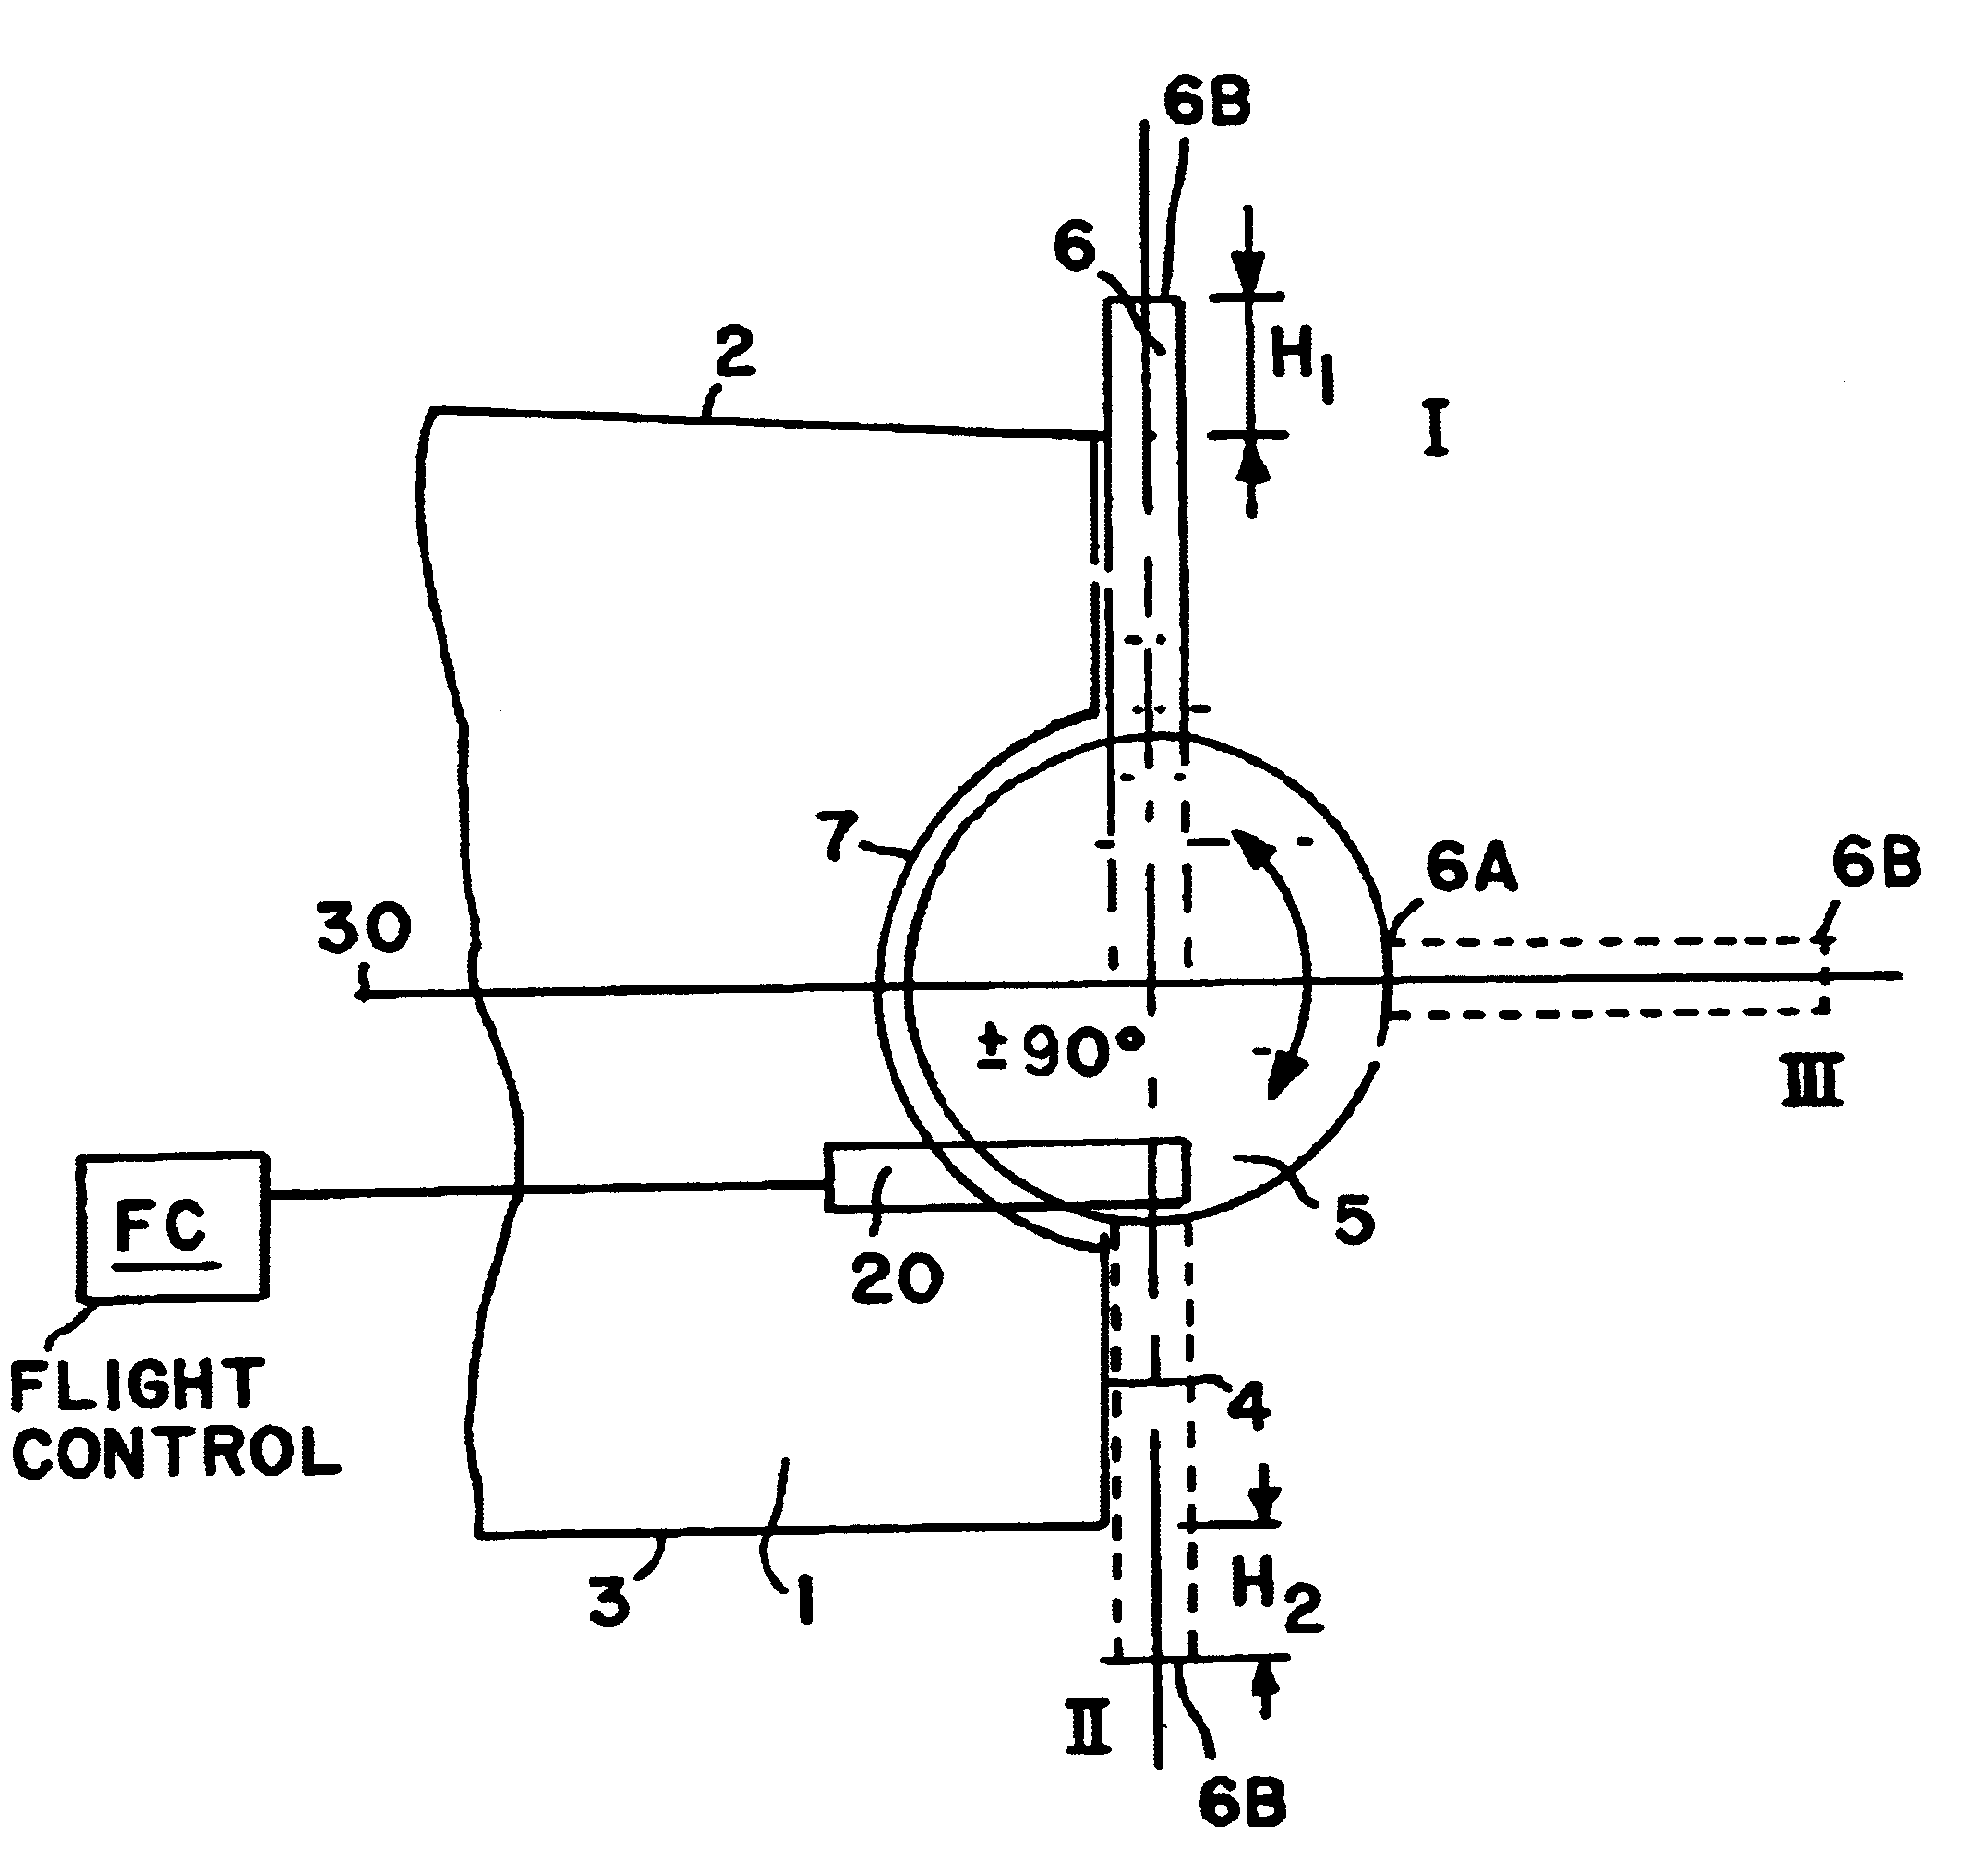 Flap arrangement for varying the aerodynamic lift generated by an aerodynamic element of an aircraft